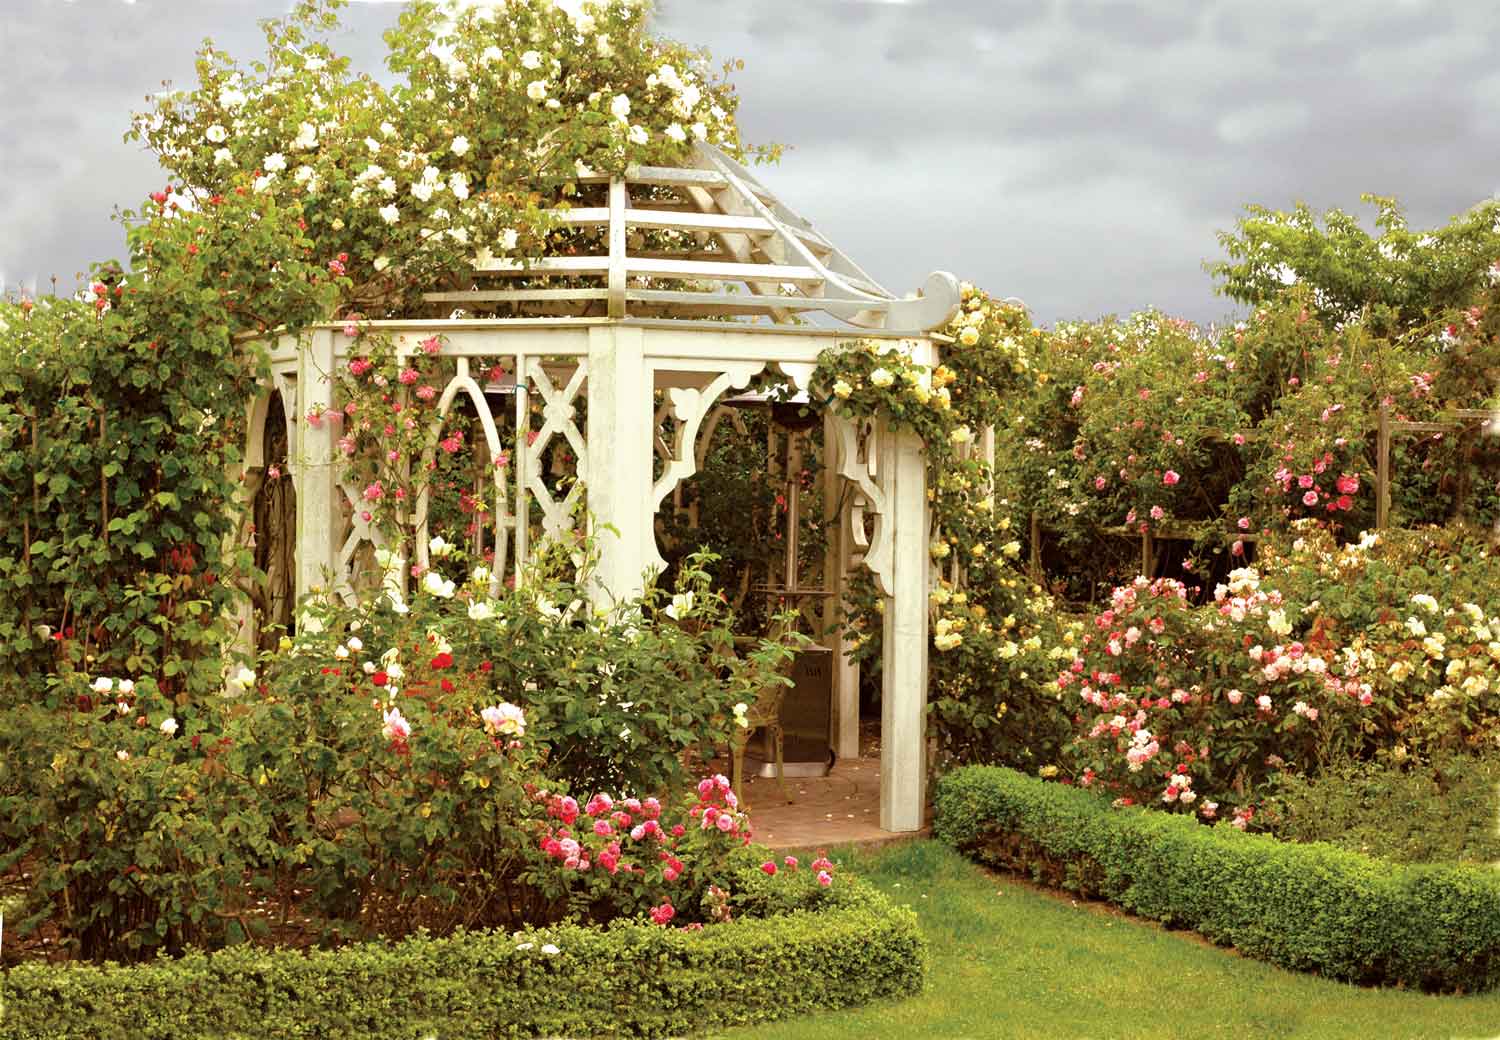 terrific-victorian-style-gardens-terrific-seeing-the-garden-now-its-hard-to-believe-that-it-was-shabby-and.jpg